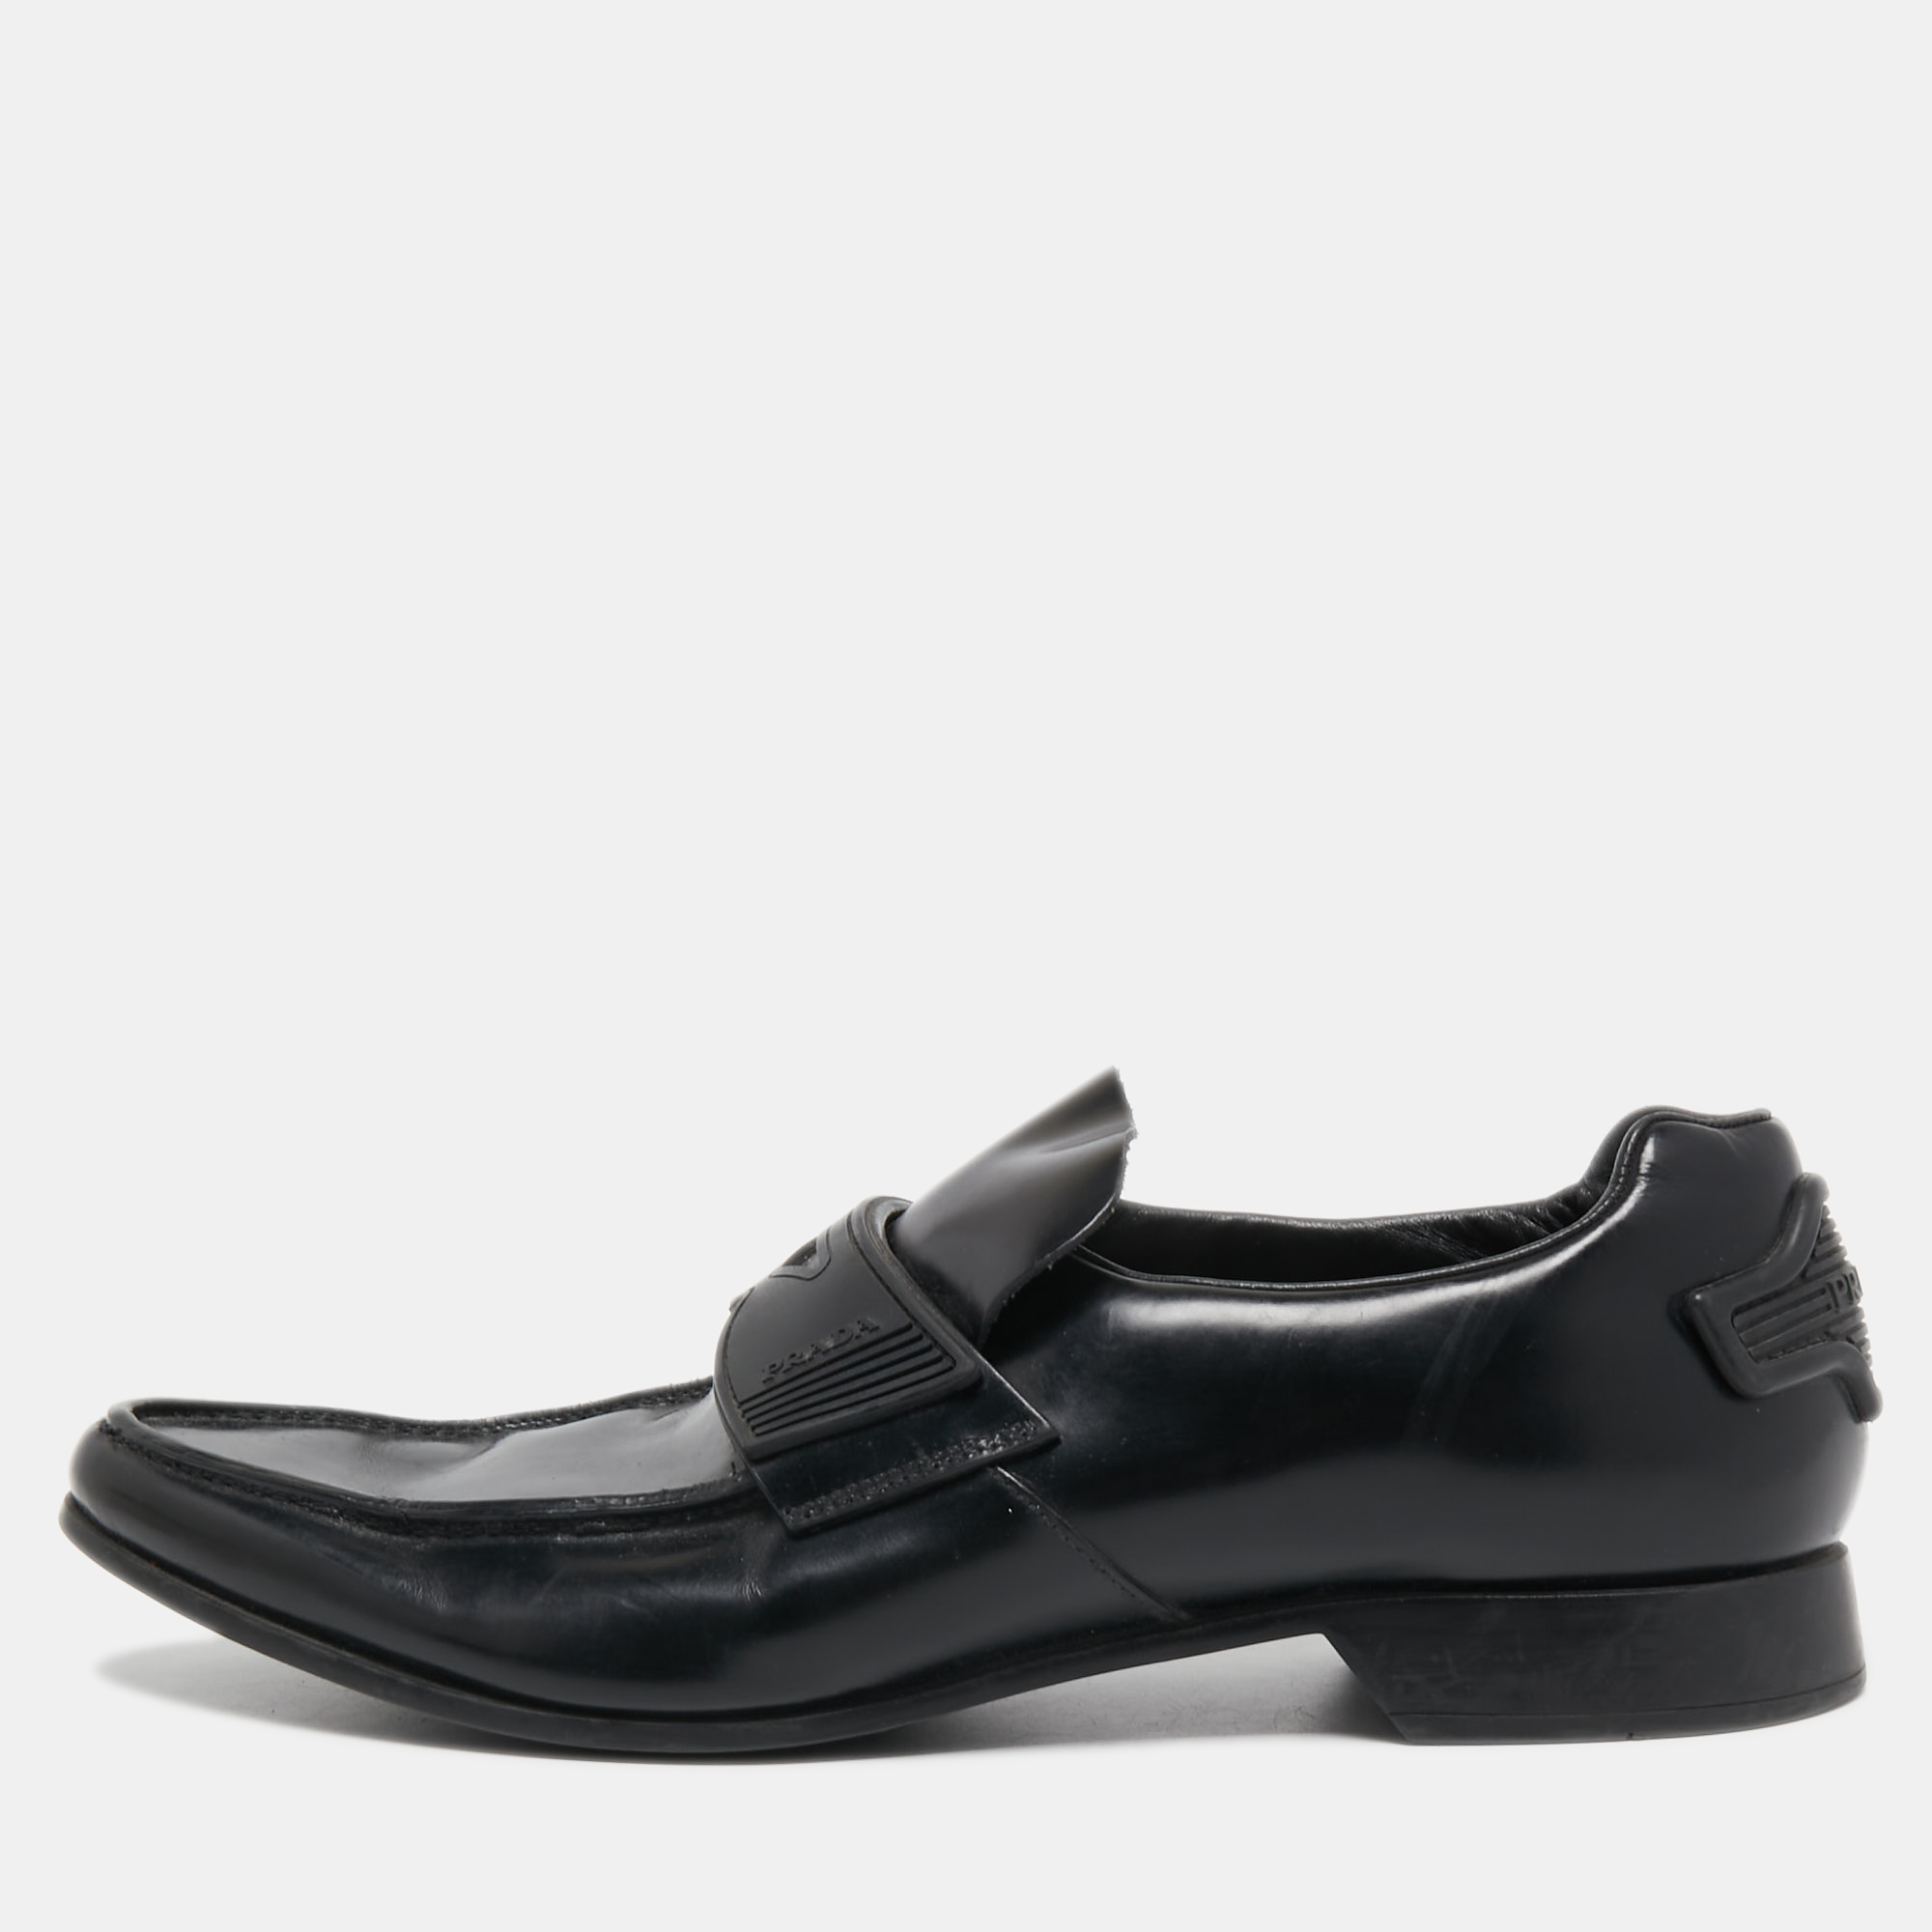 Pre-owned Prada Black Leather Slip On Loafers Size 40.5